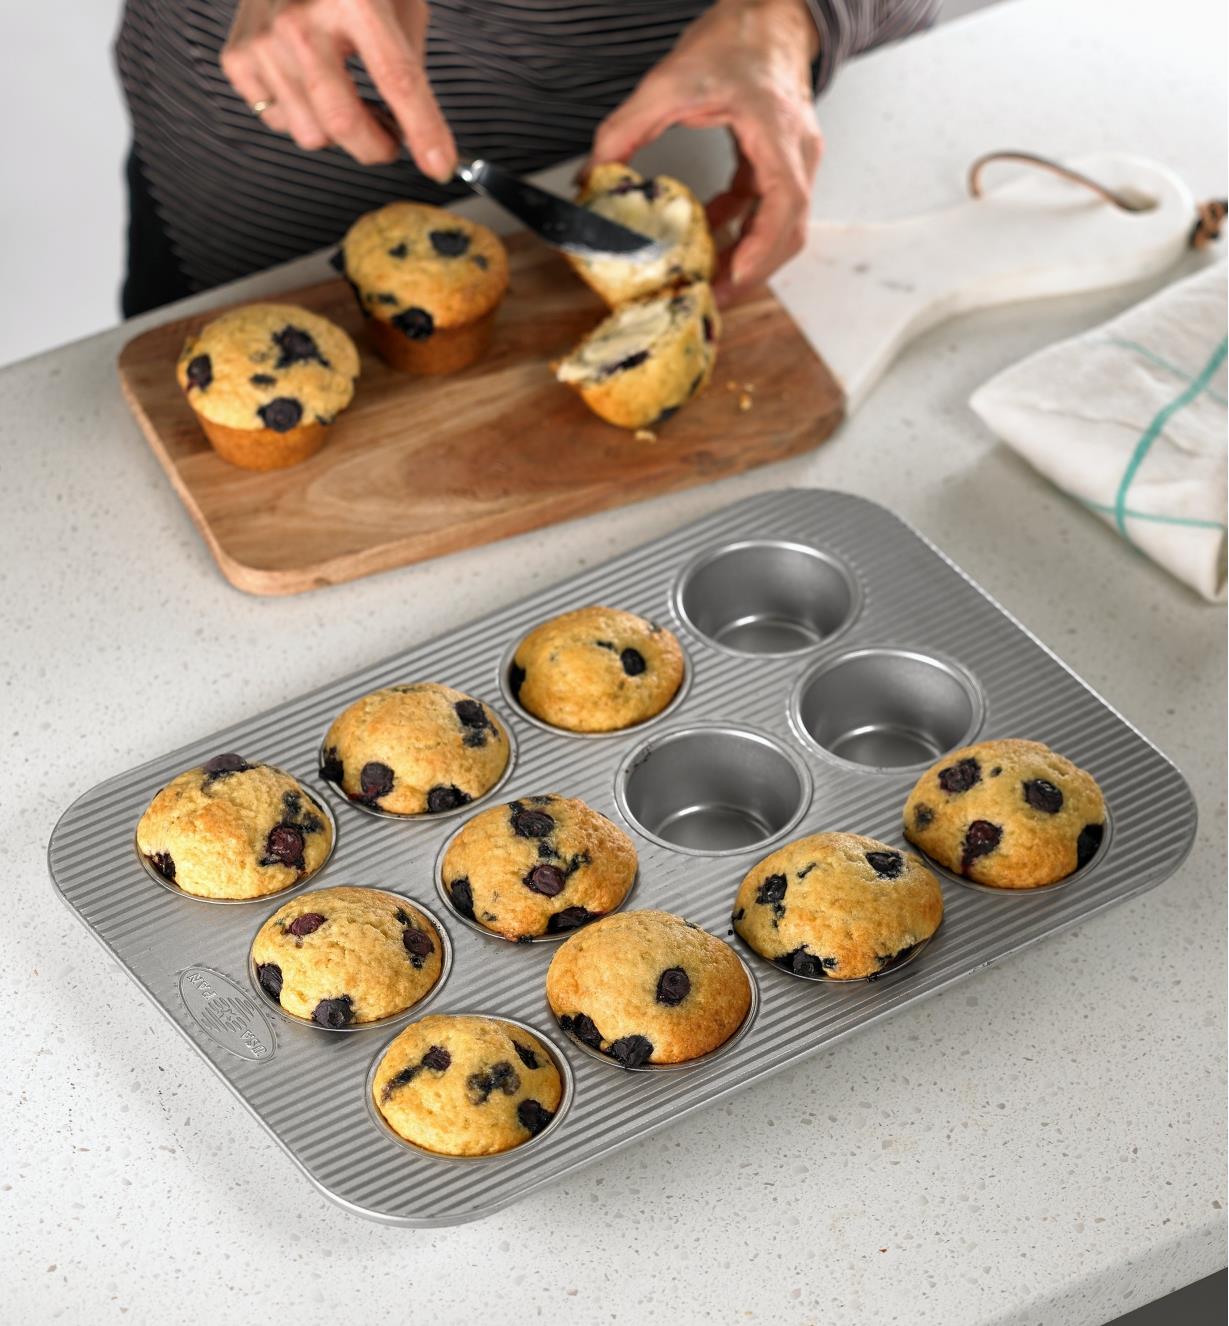 A woman butters one of twelve fresh blueberry muffins baked in a muffin pan made by USA Pan